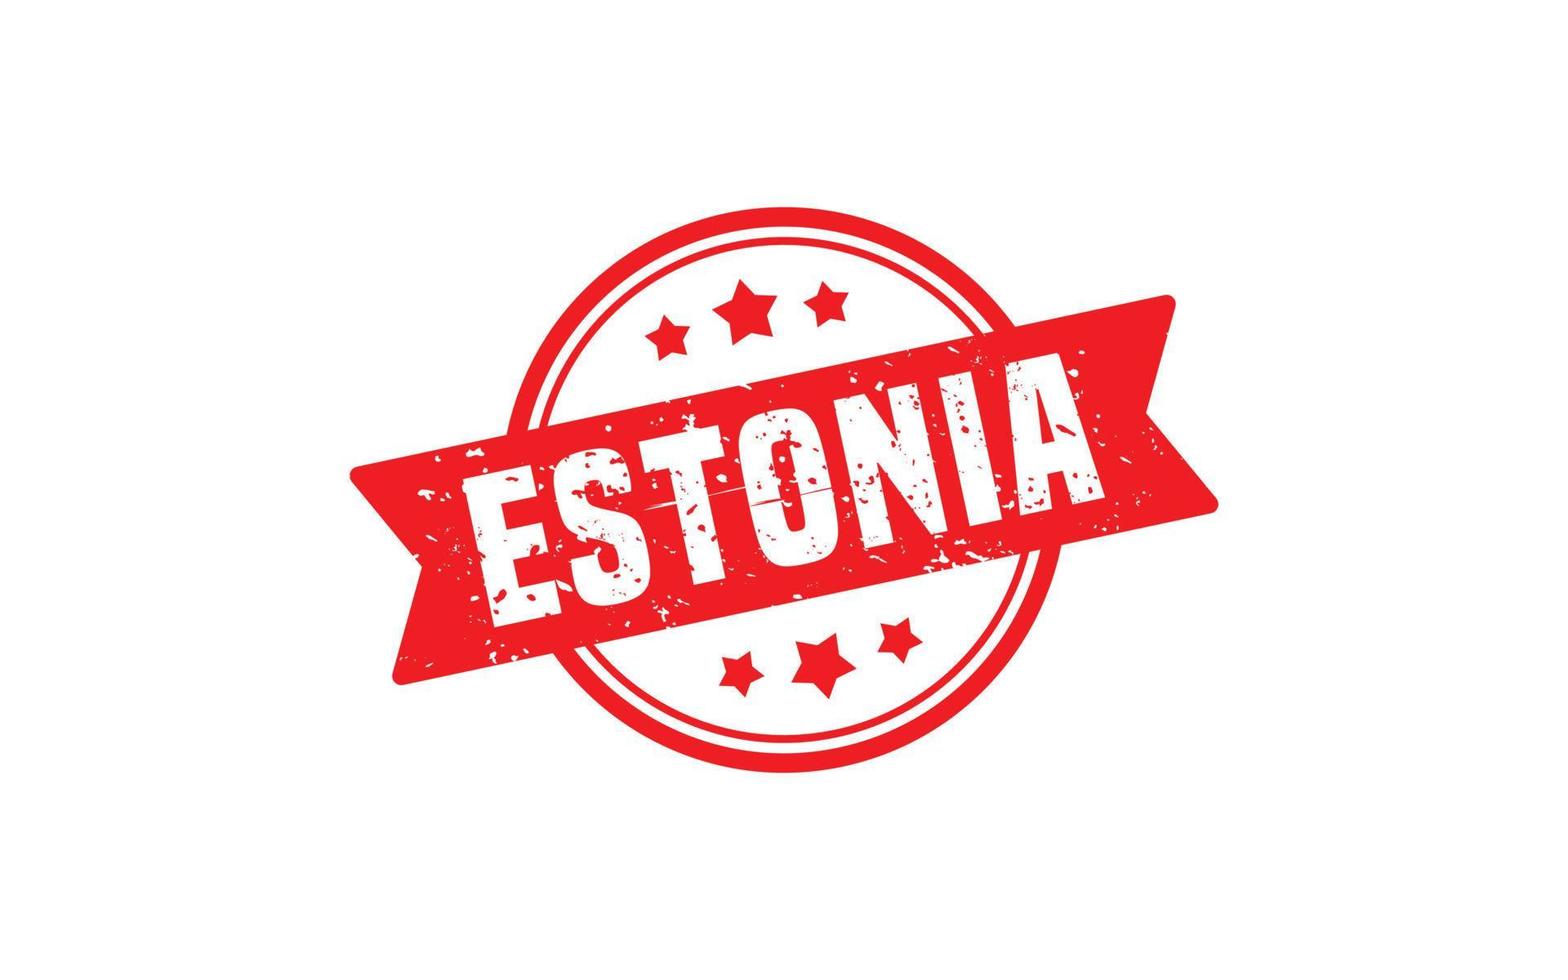 ESTONIA stamp rubber with grunge style on white background vector